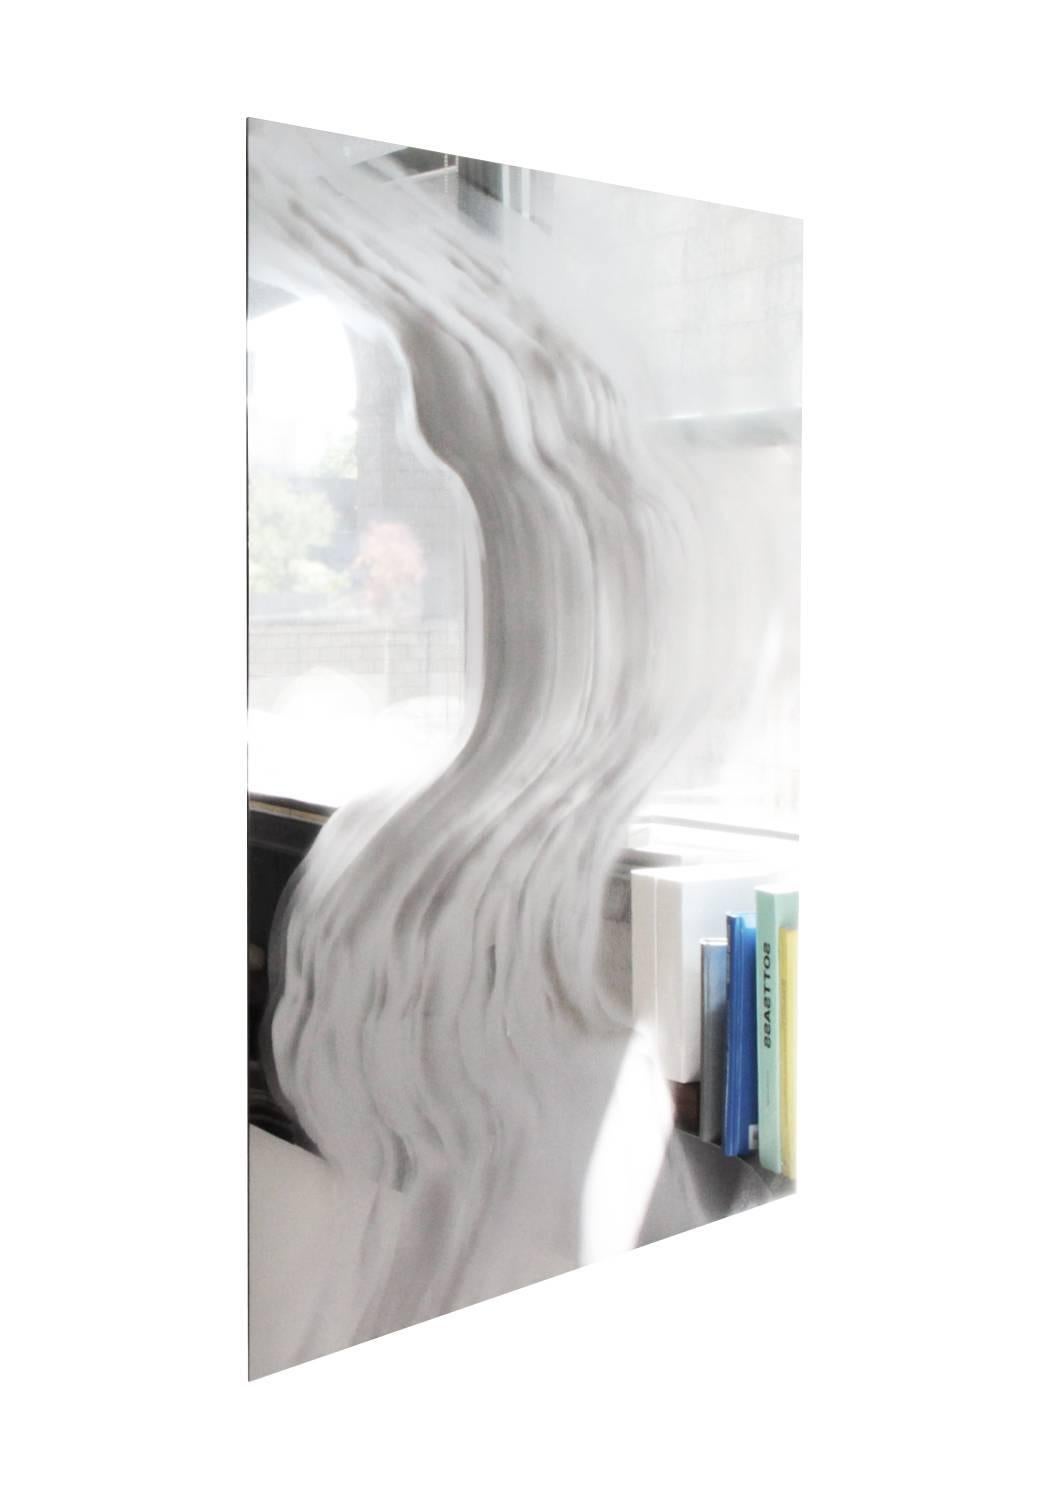 A contemporary design art object that partially obscures the viewer providing both a moment of reflection and self-contemplation. 

Individually hand etched with abstract formed sandblasting. Each mirror reveals a diaphanous cloud through the